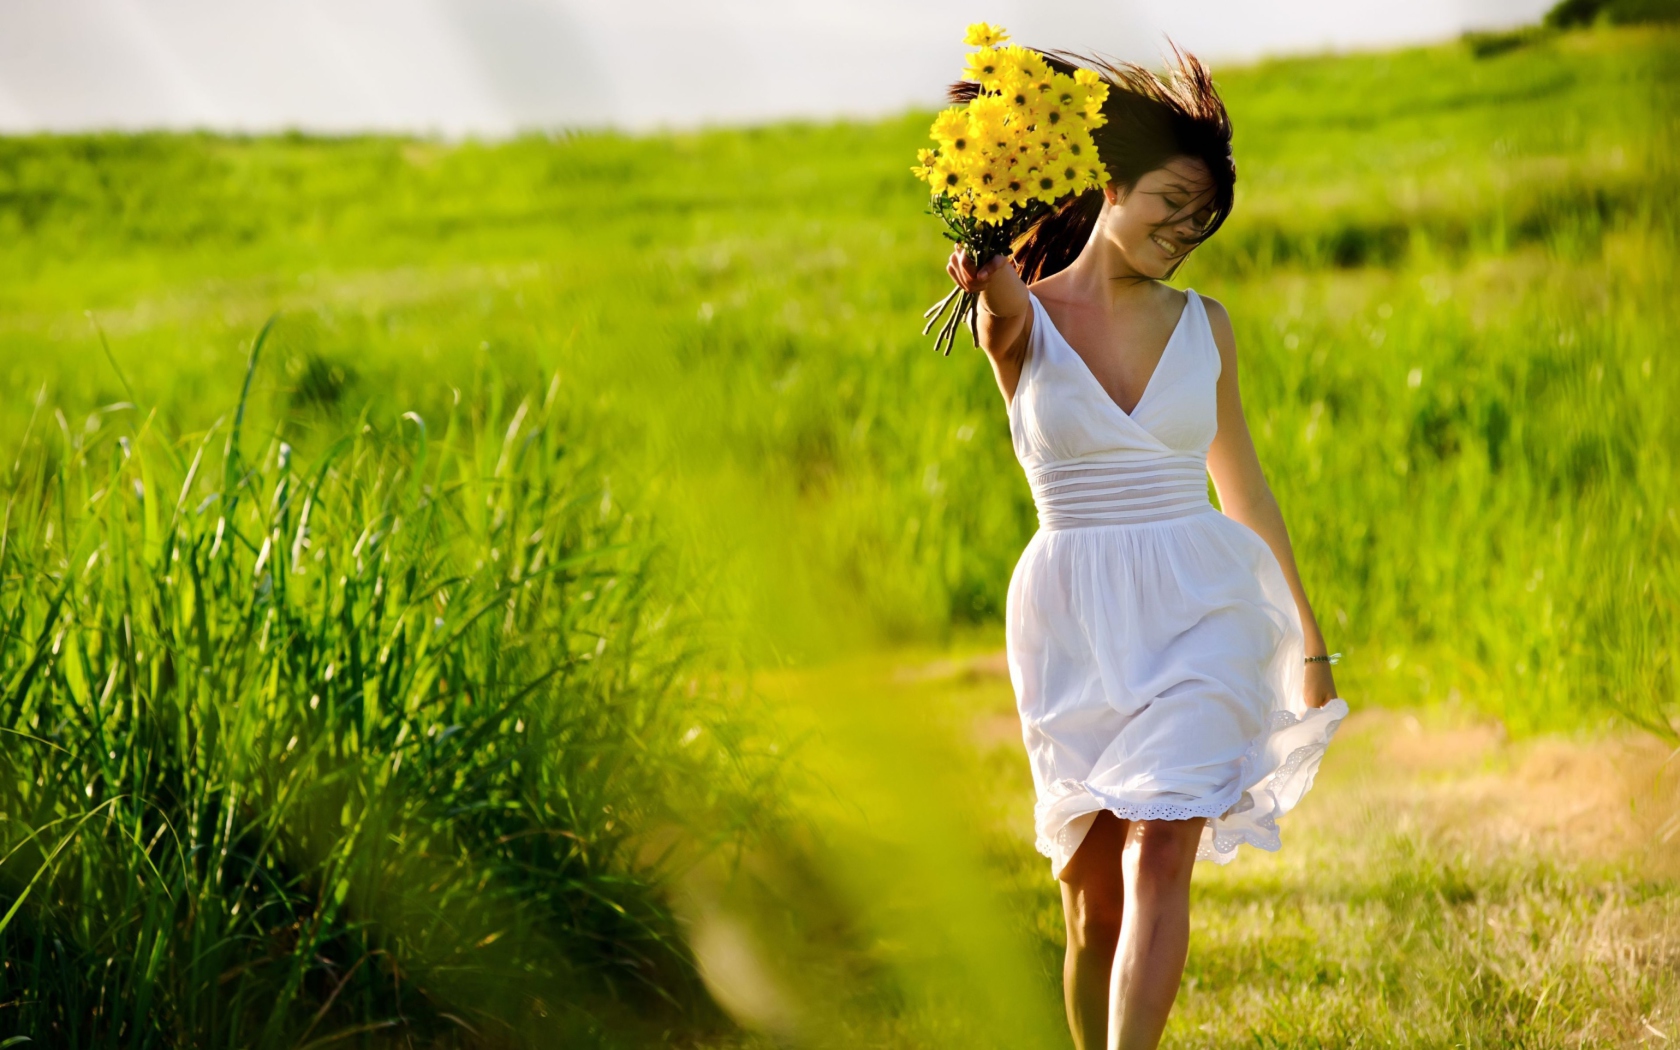 Girl With Yellow Flowers In Field wallpaper 1680x1050